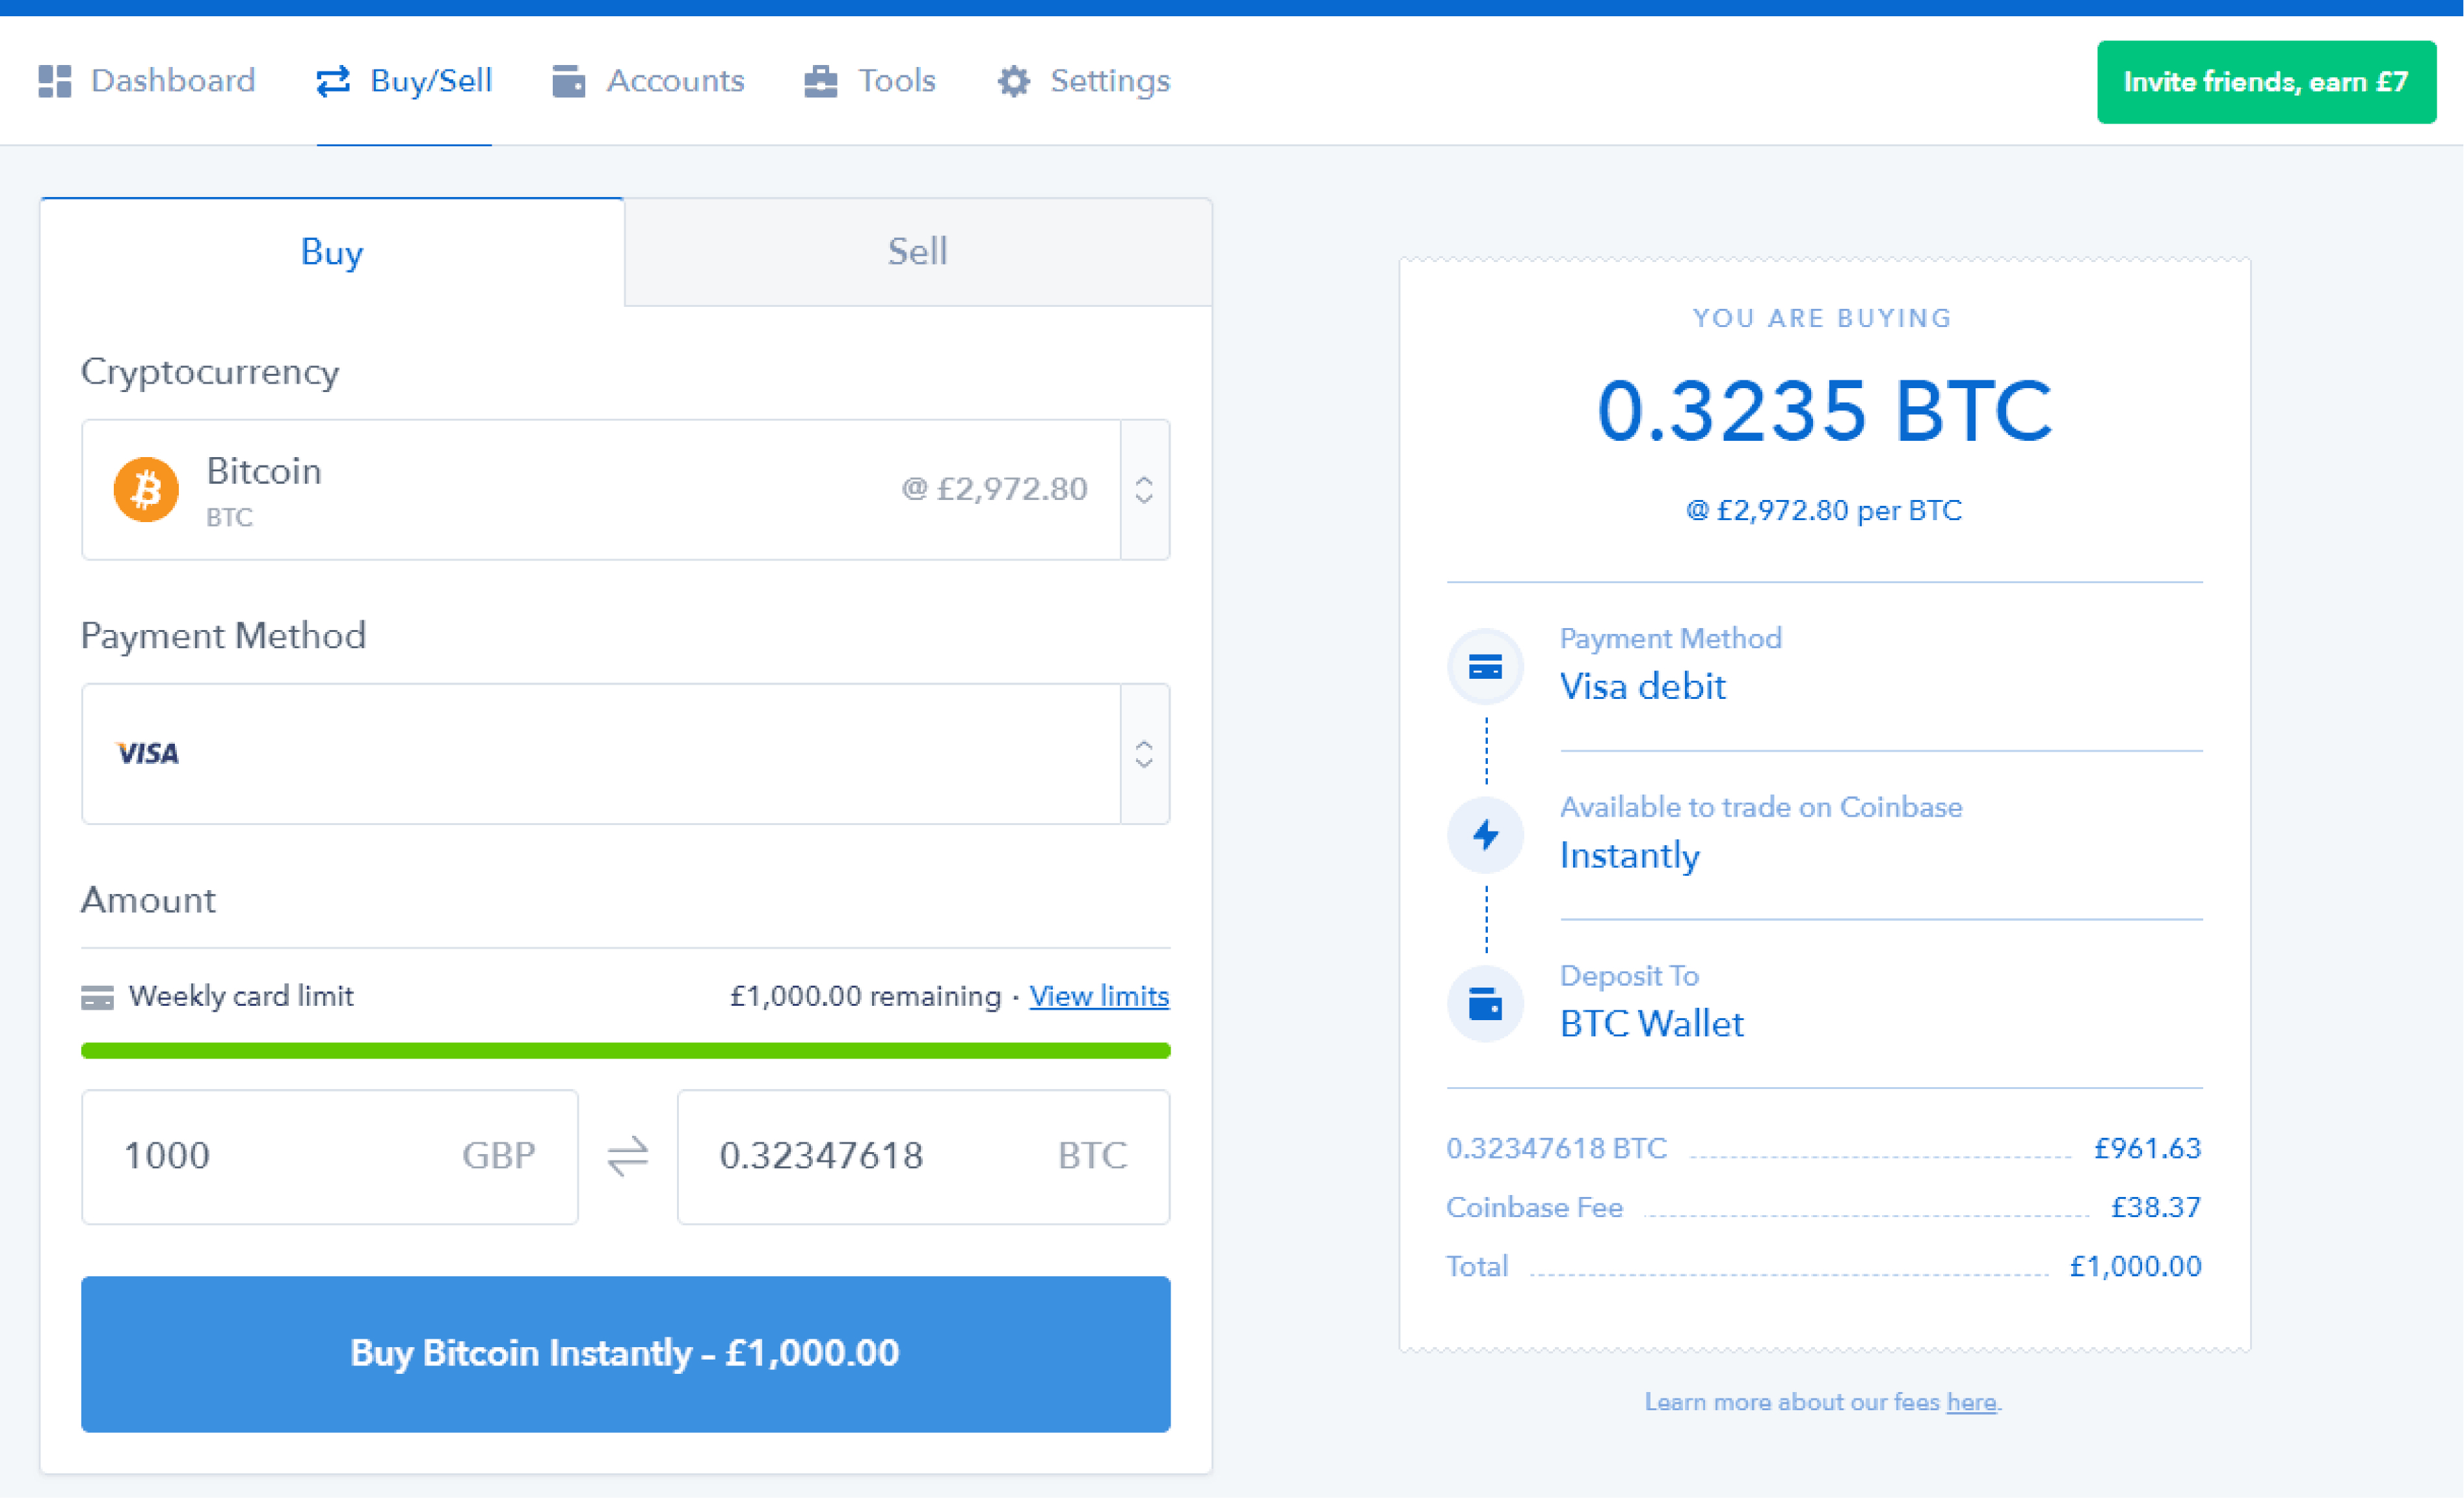 cant log into my coinbase account